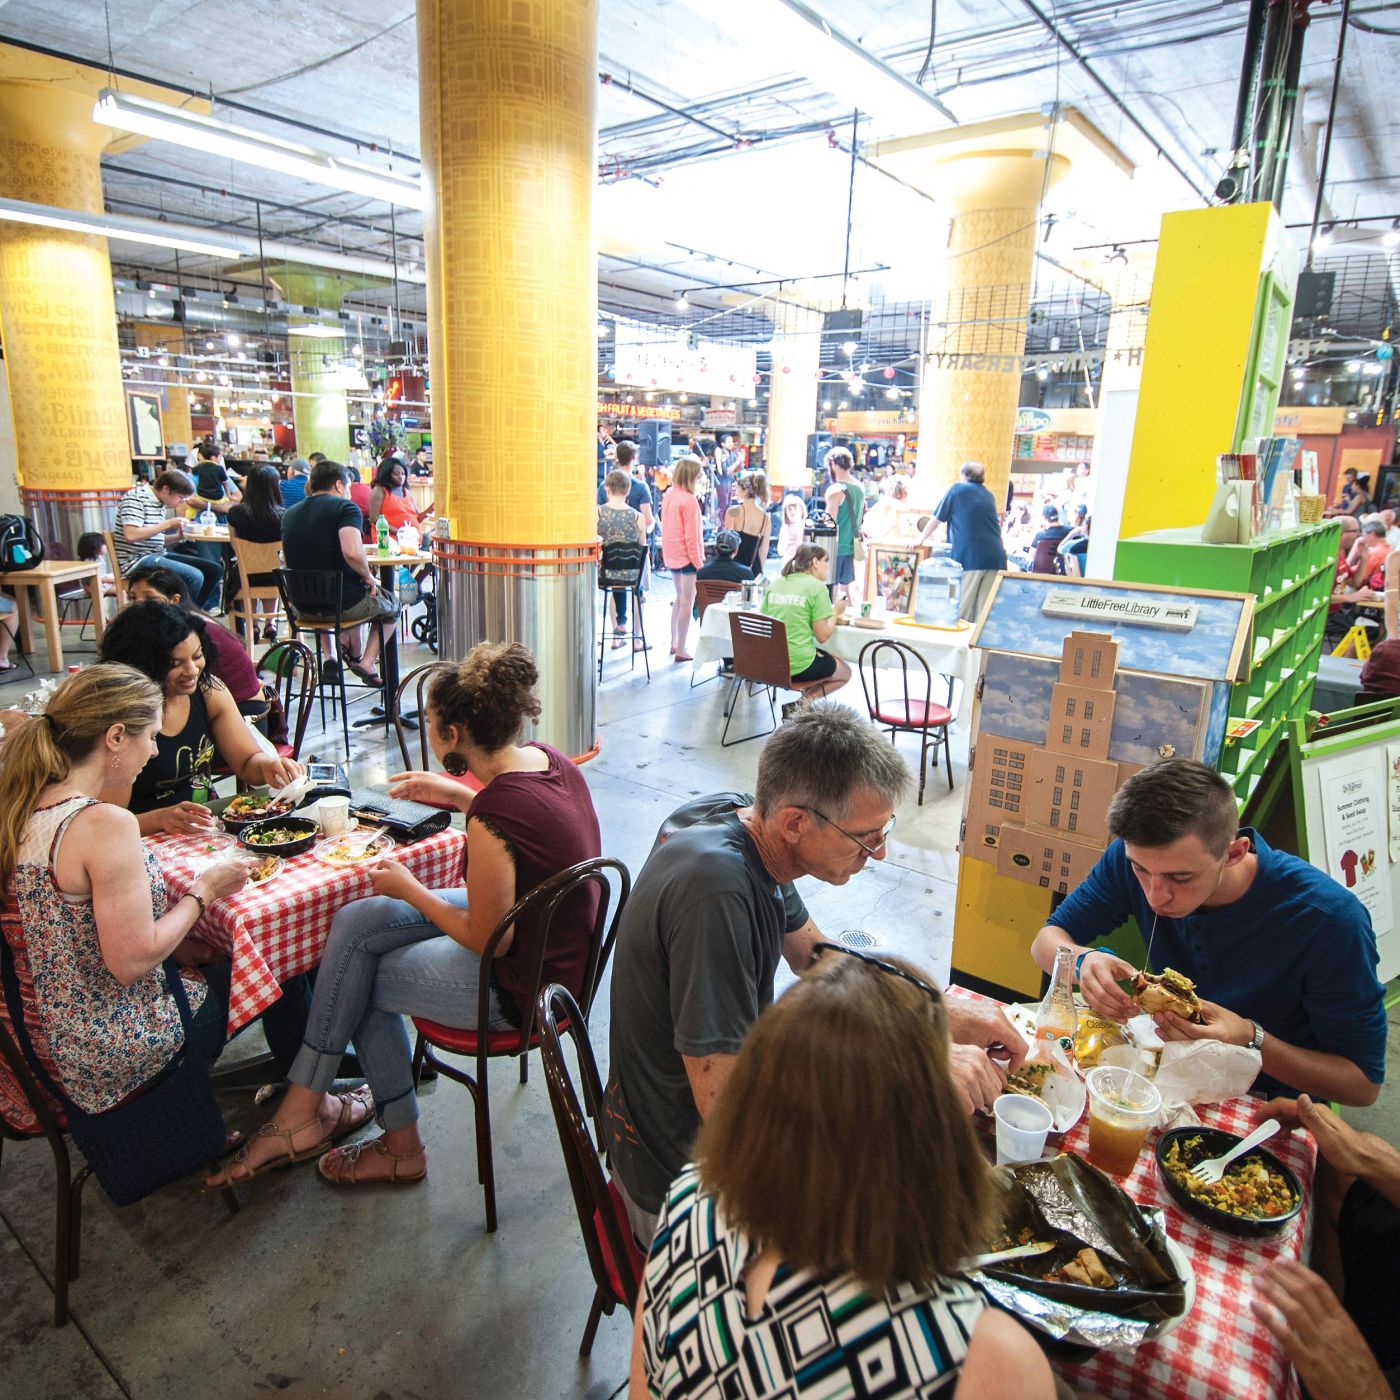 Patrons enjoy a variety of cuisines at Midtown Global Market, a key NDC project.